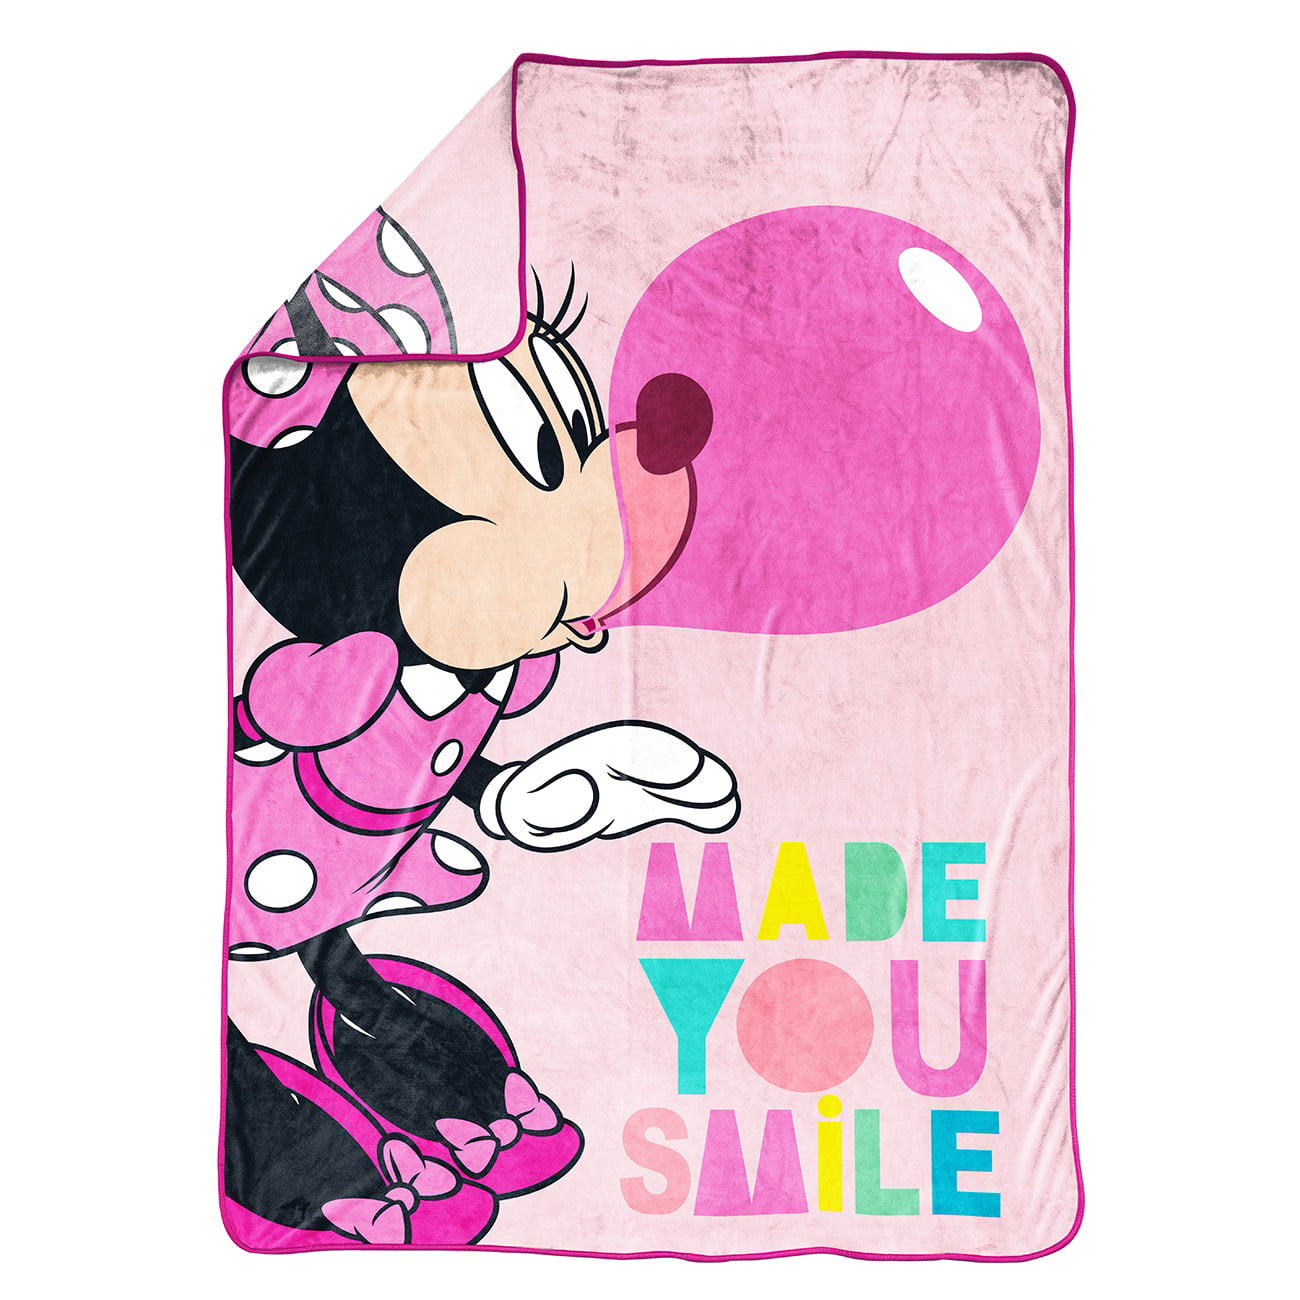 CUSHION COVER MINNIE MOUSE PINK CAN BE PERSONALISED KIDS ROOM NEW FREE P&P 